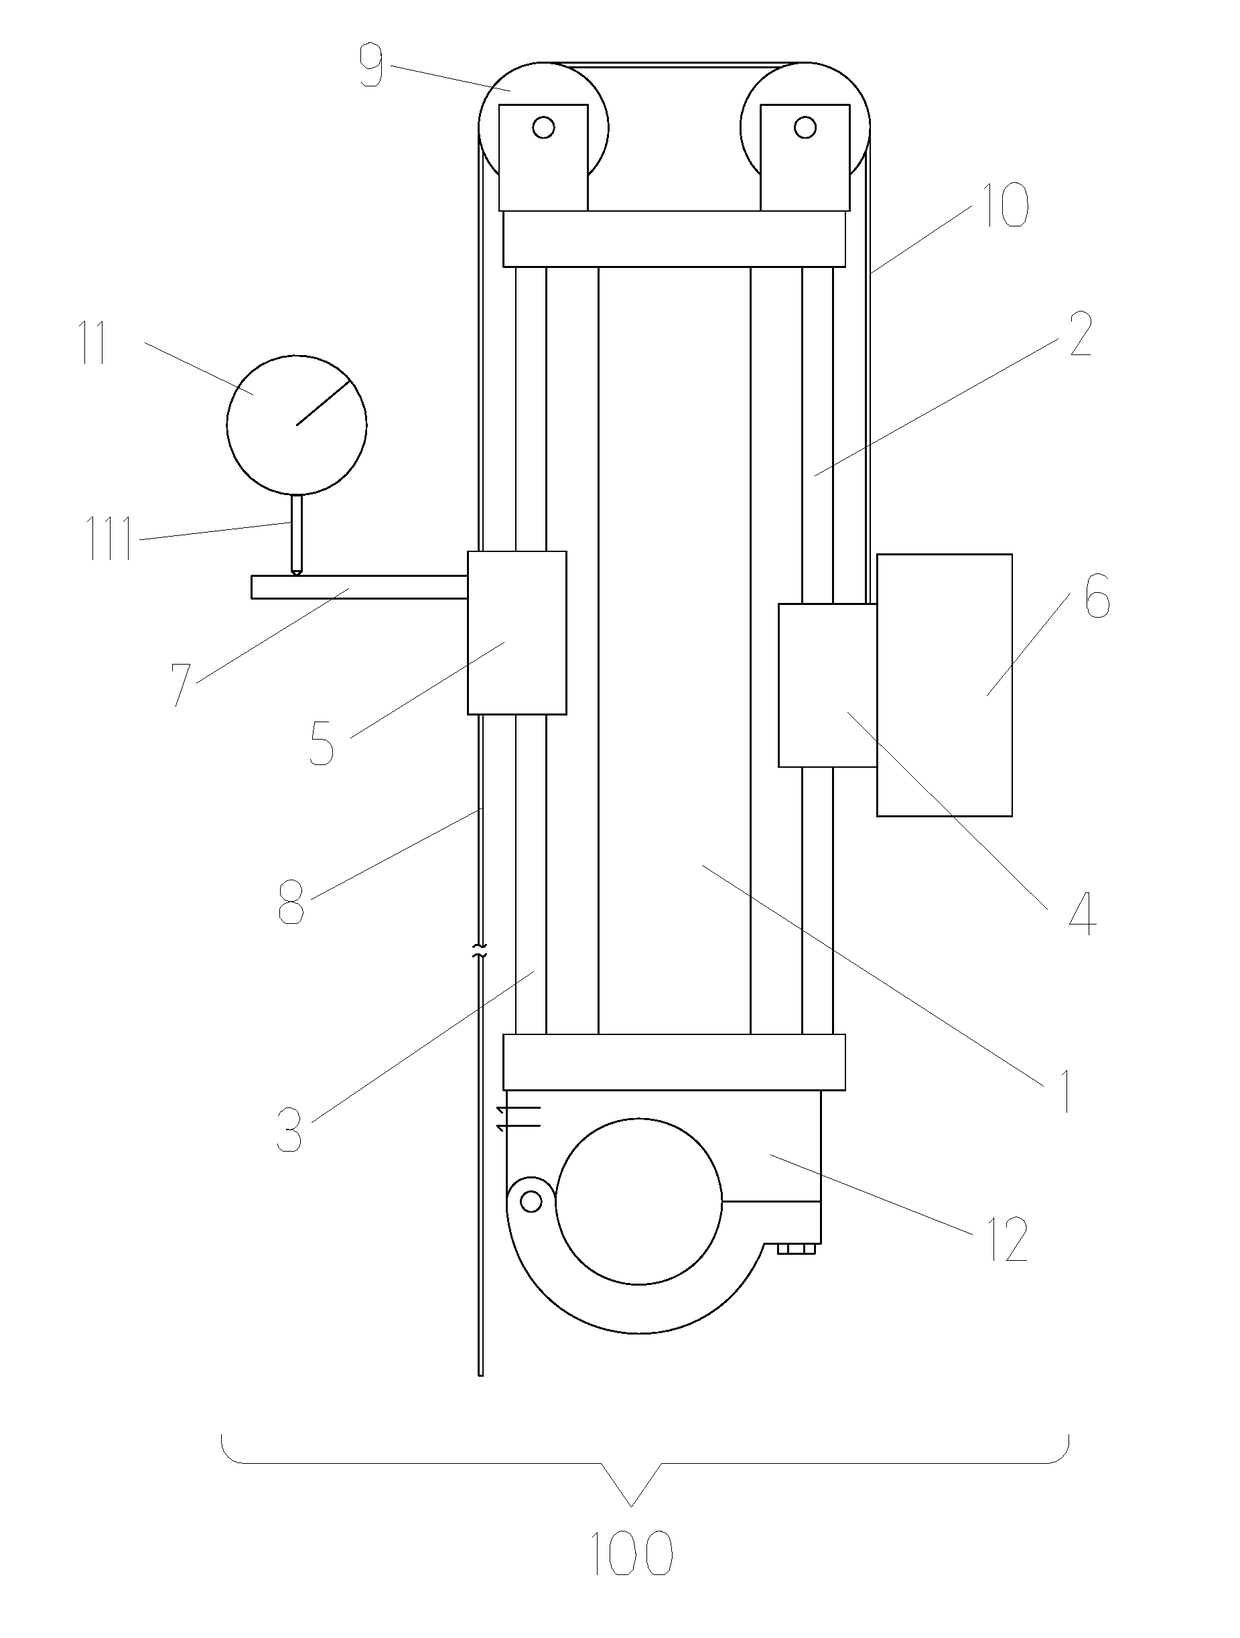 Vertical displacement detecting device